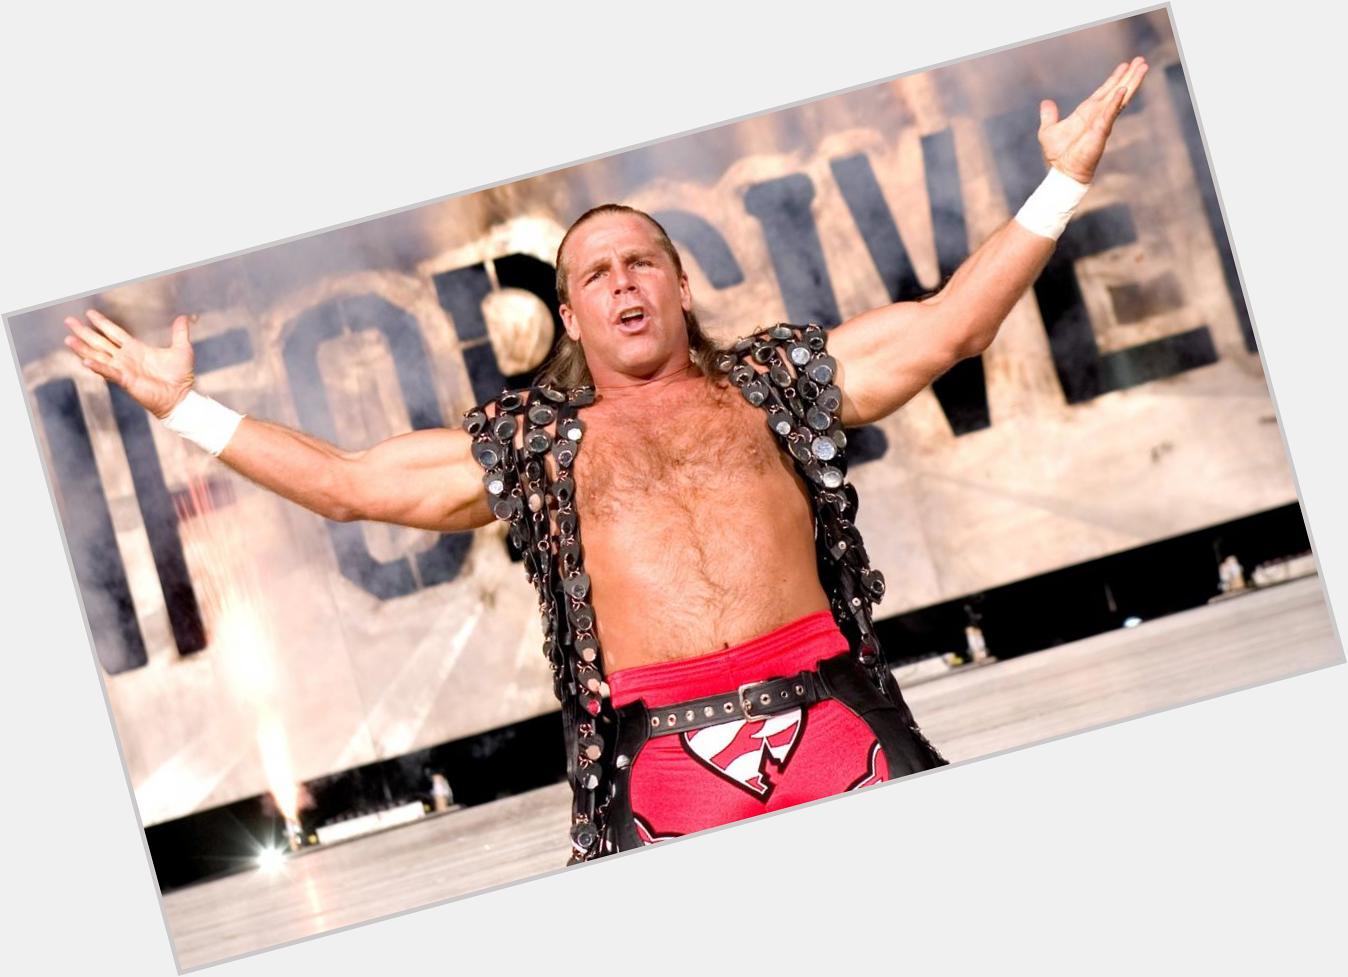 Happy Birthday to WWE Hall of Famer Shawn Michaels who turns 53 today! 